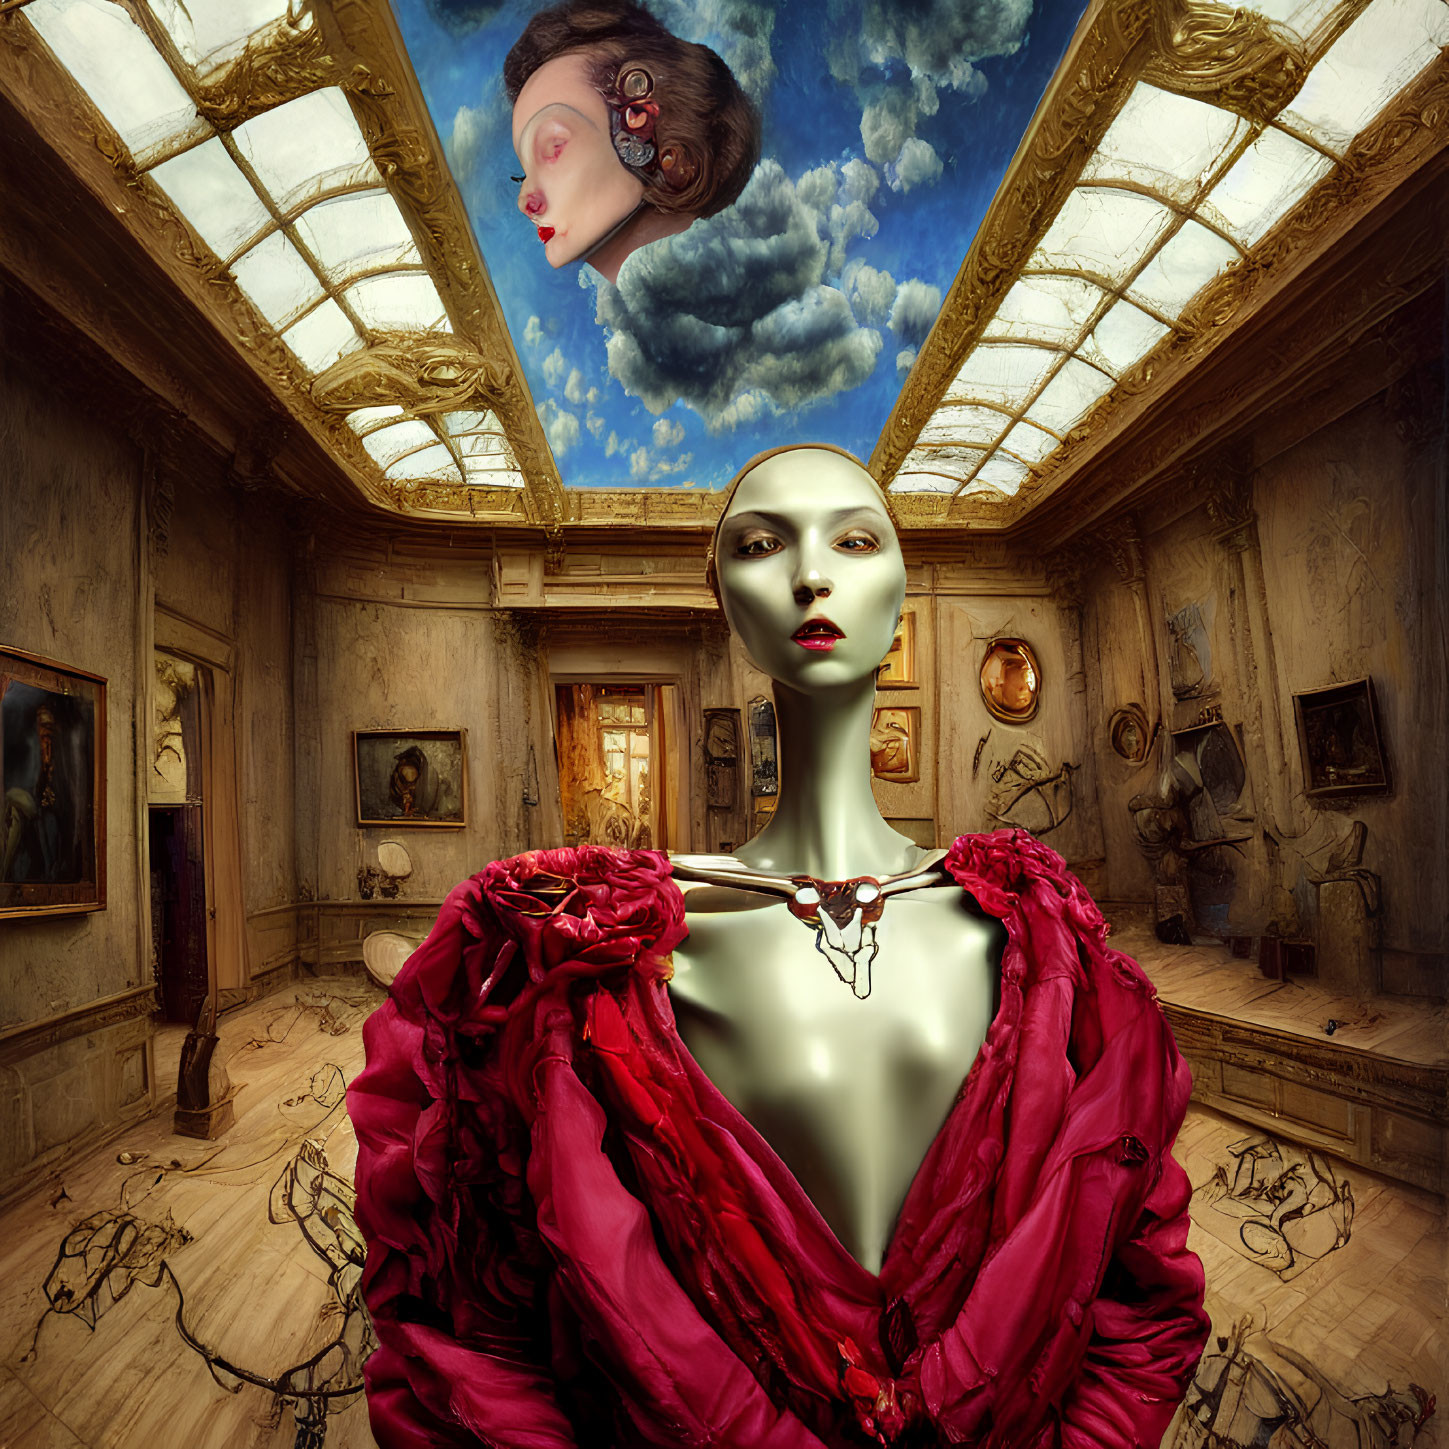 Surreal portrait of floating female figure in red gown in classical room